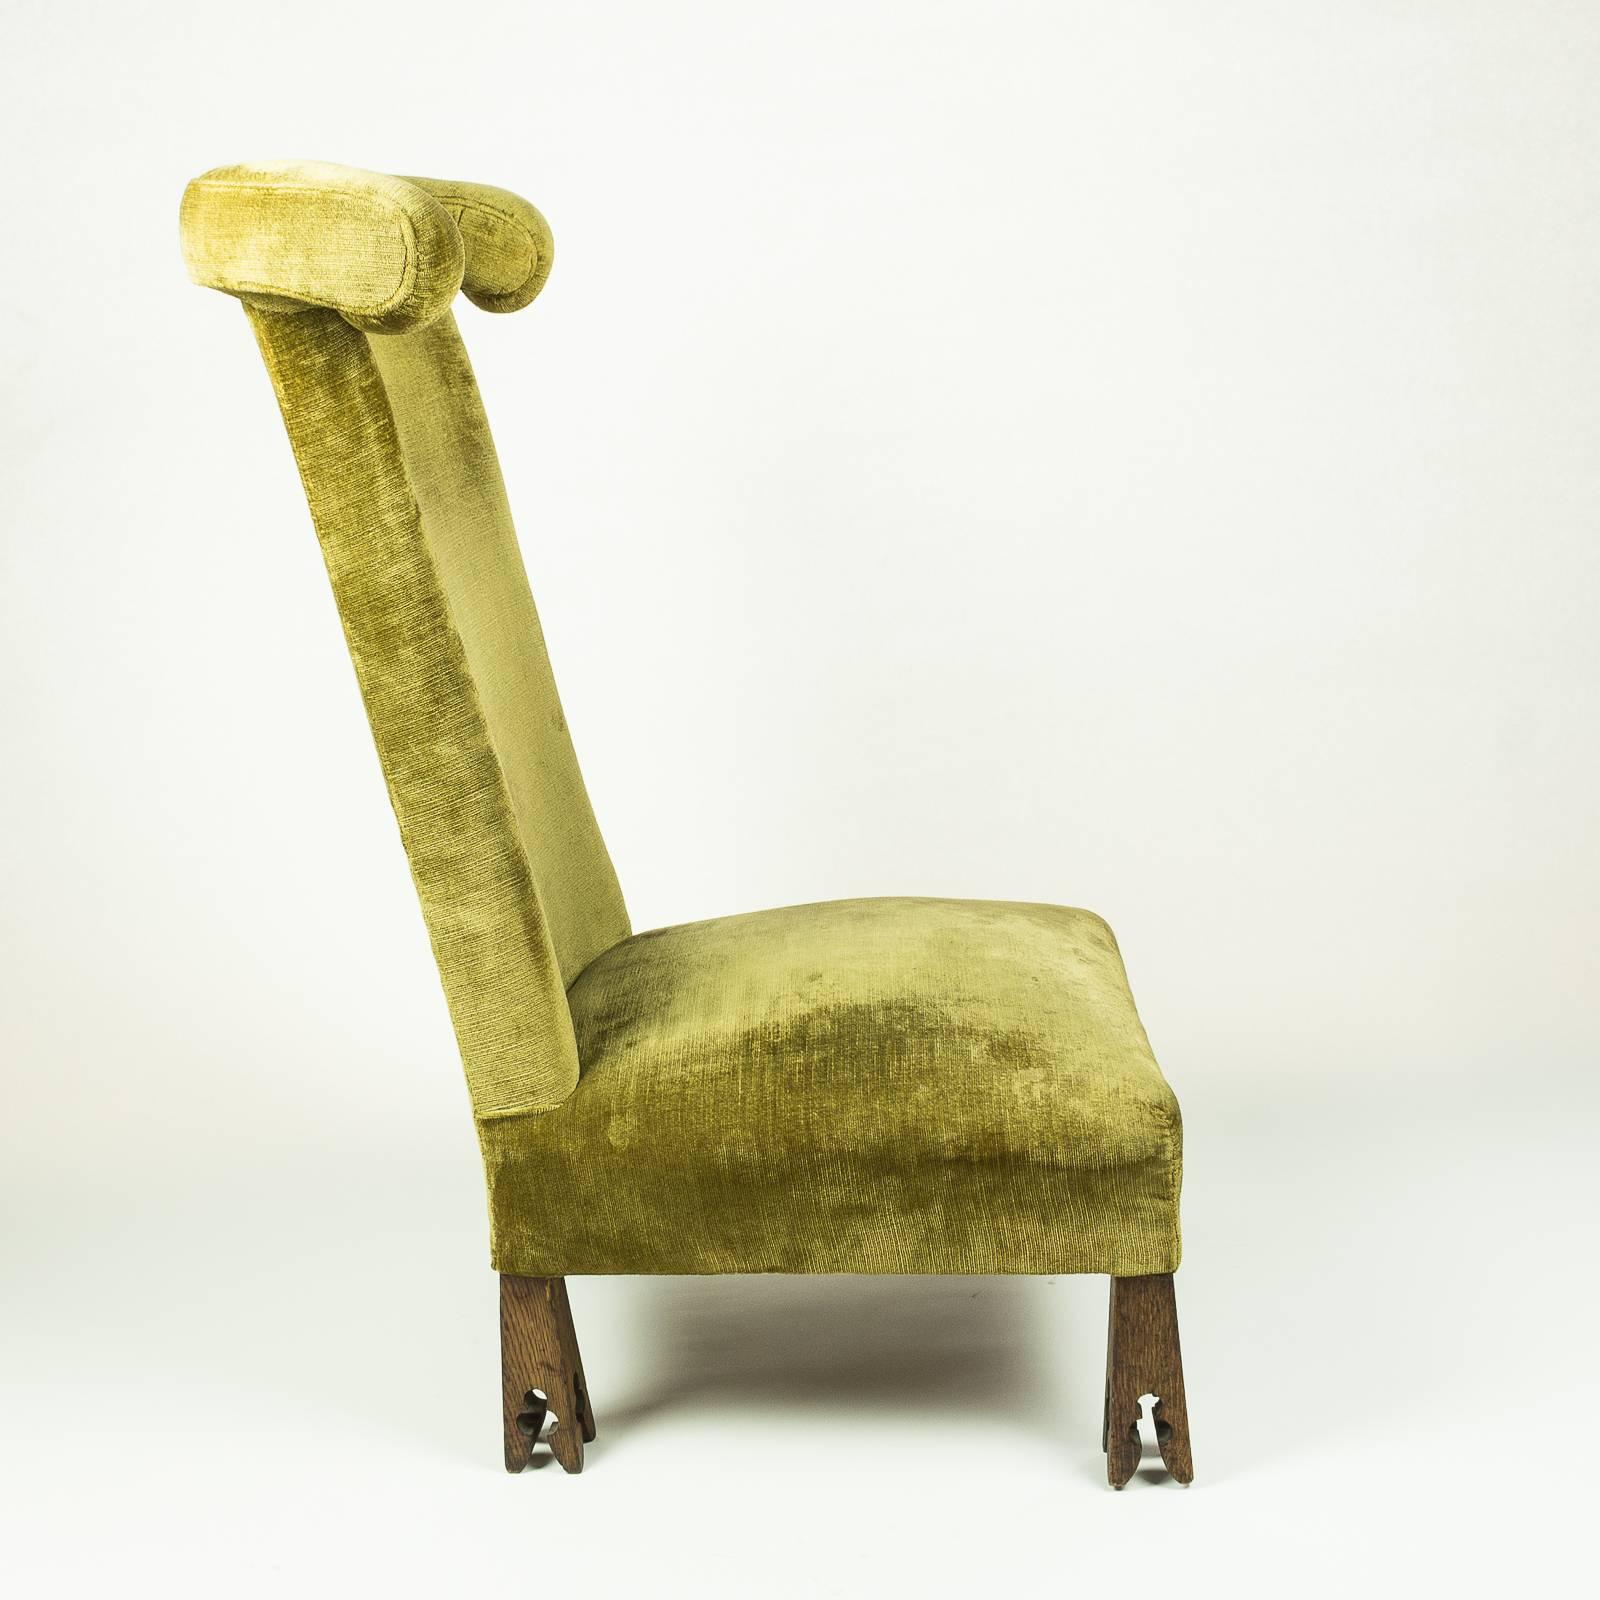 British Arts and Crafts 'Prie Dieu' Chair